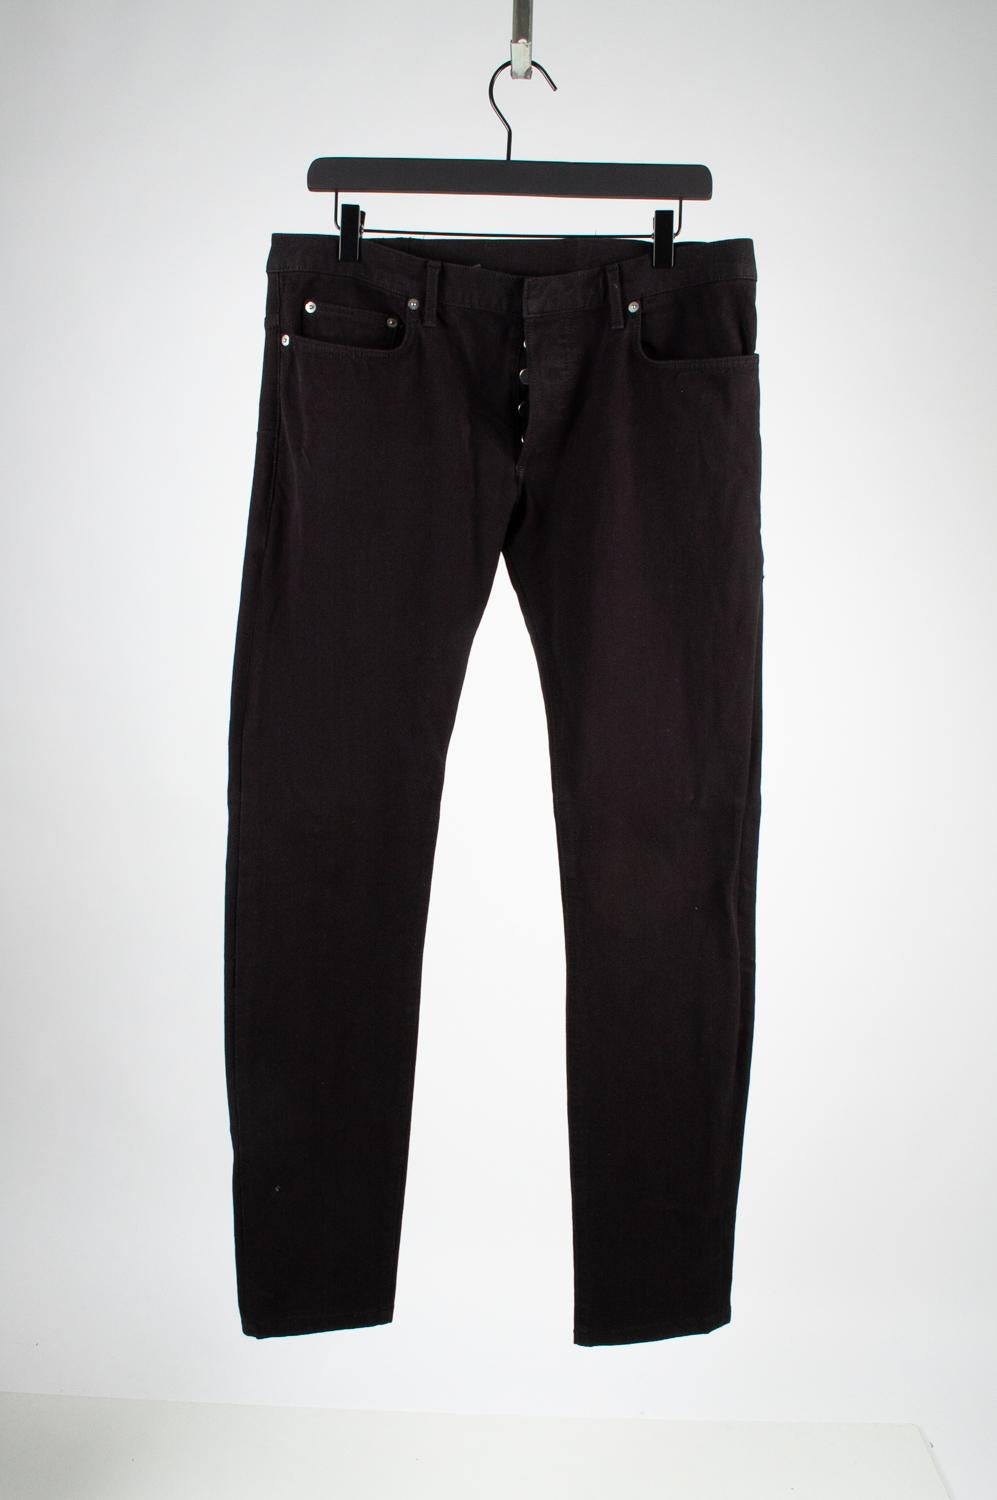 100% genuine Dior Homme Men Jeans, S520
Color: Black
(An actual color may a bit vary due to individual computer screen interpretation)
Material: 55% rayon, 40% cotton, 5% polyurethane
Tag size: W34, Made in Japan
These pants are great quality item.